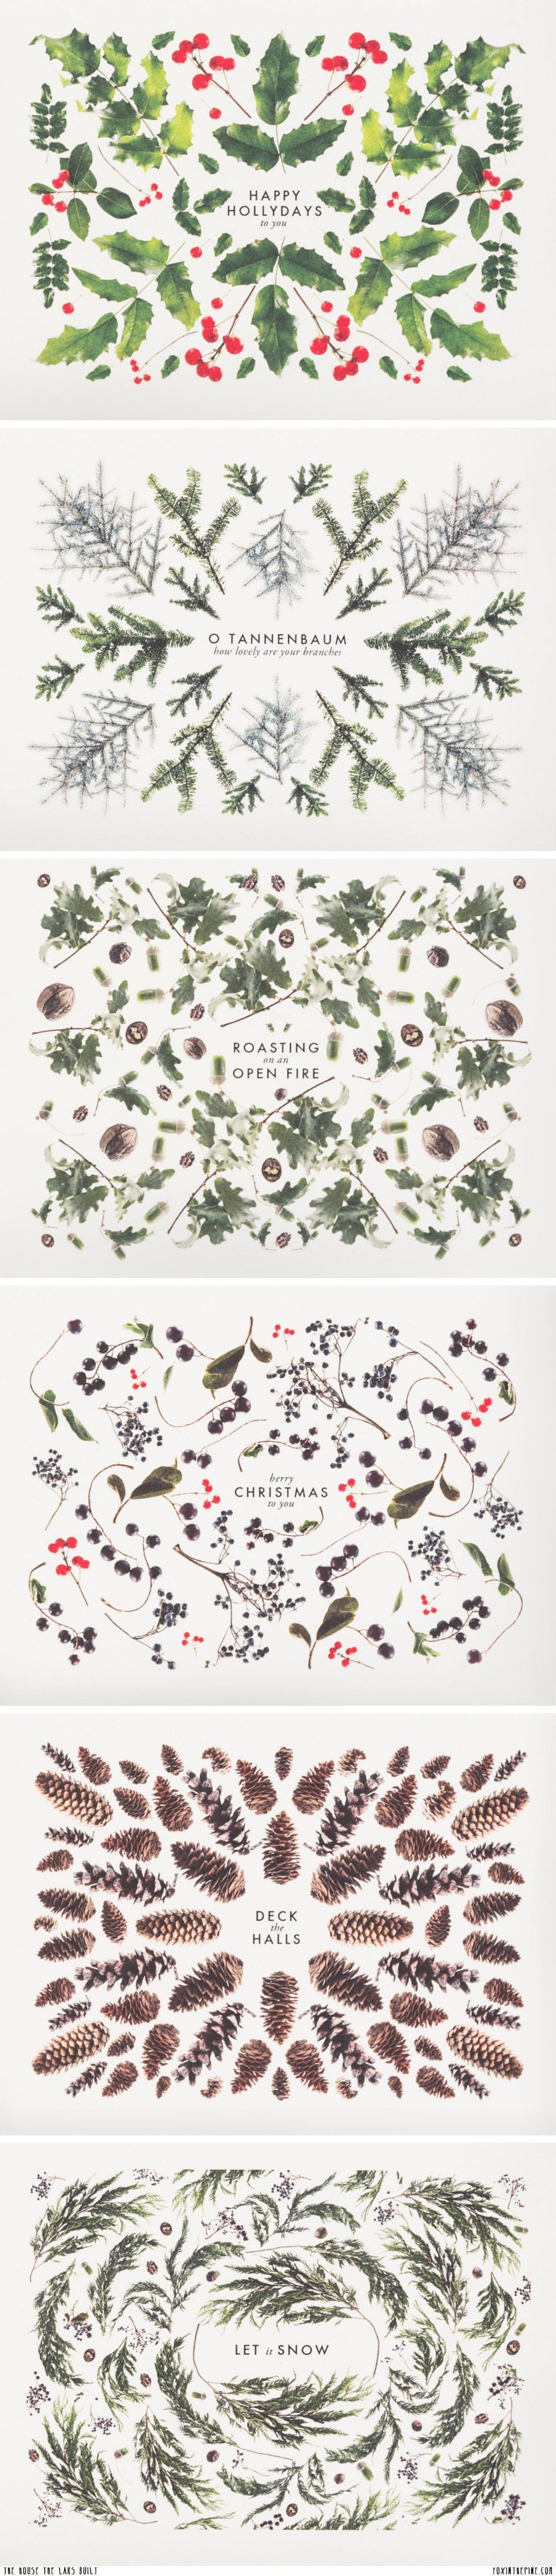 Christmas Cards // The House that Lars Built, via Fox in the Pine